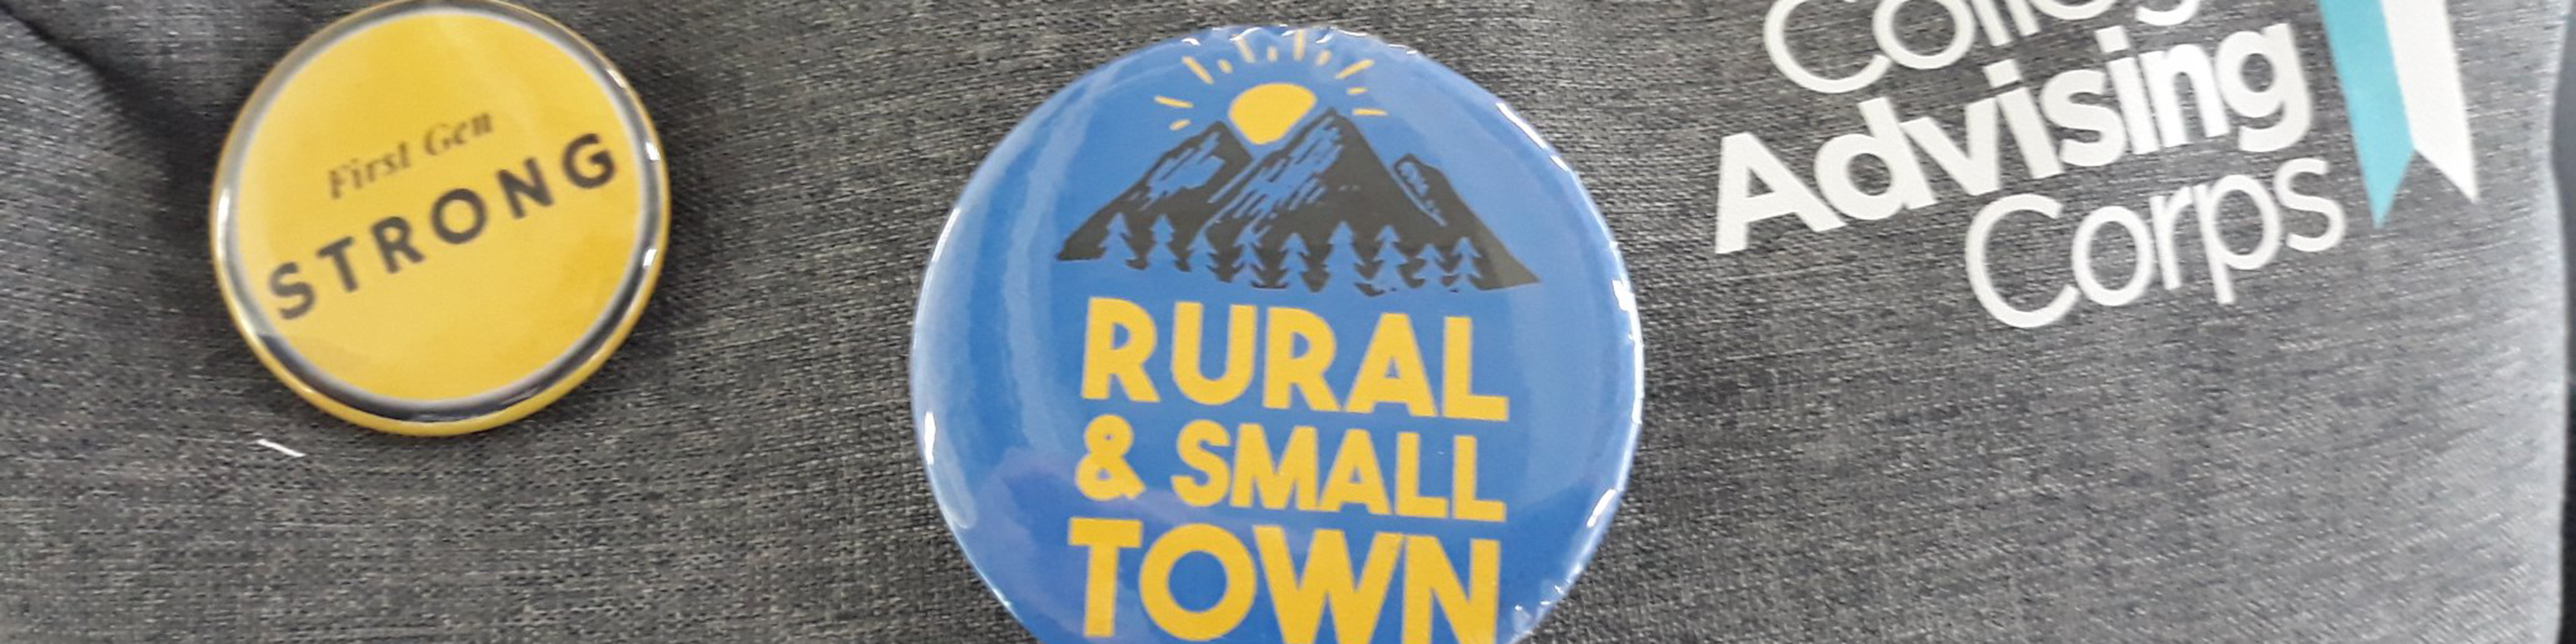 Closeup photo of a gray backpack with, from left, a round yellow pin that reads "first-gen strong," a round blue pin that reads "rural & small town," and the logo of College Advising Corps printed in white text